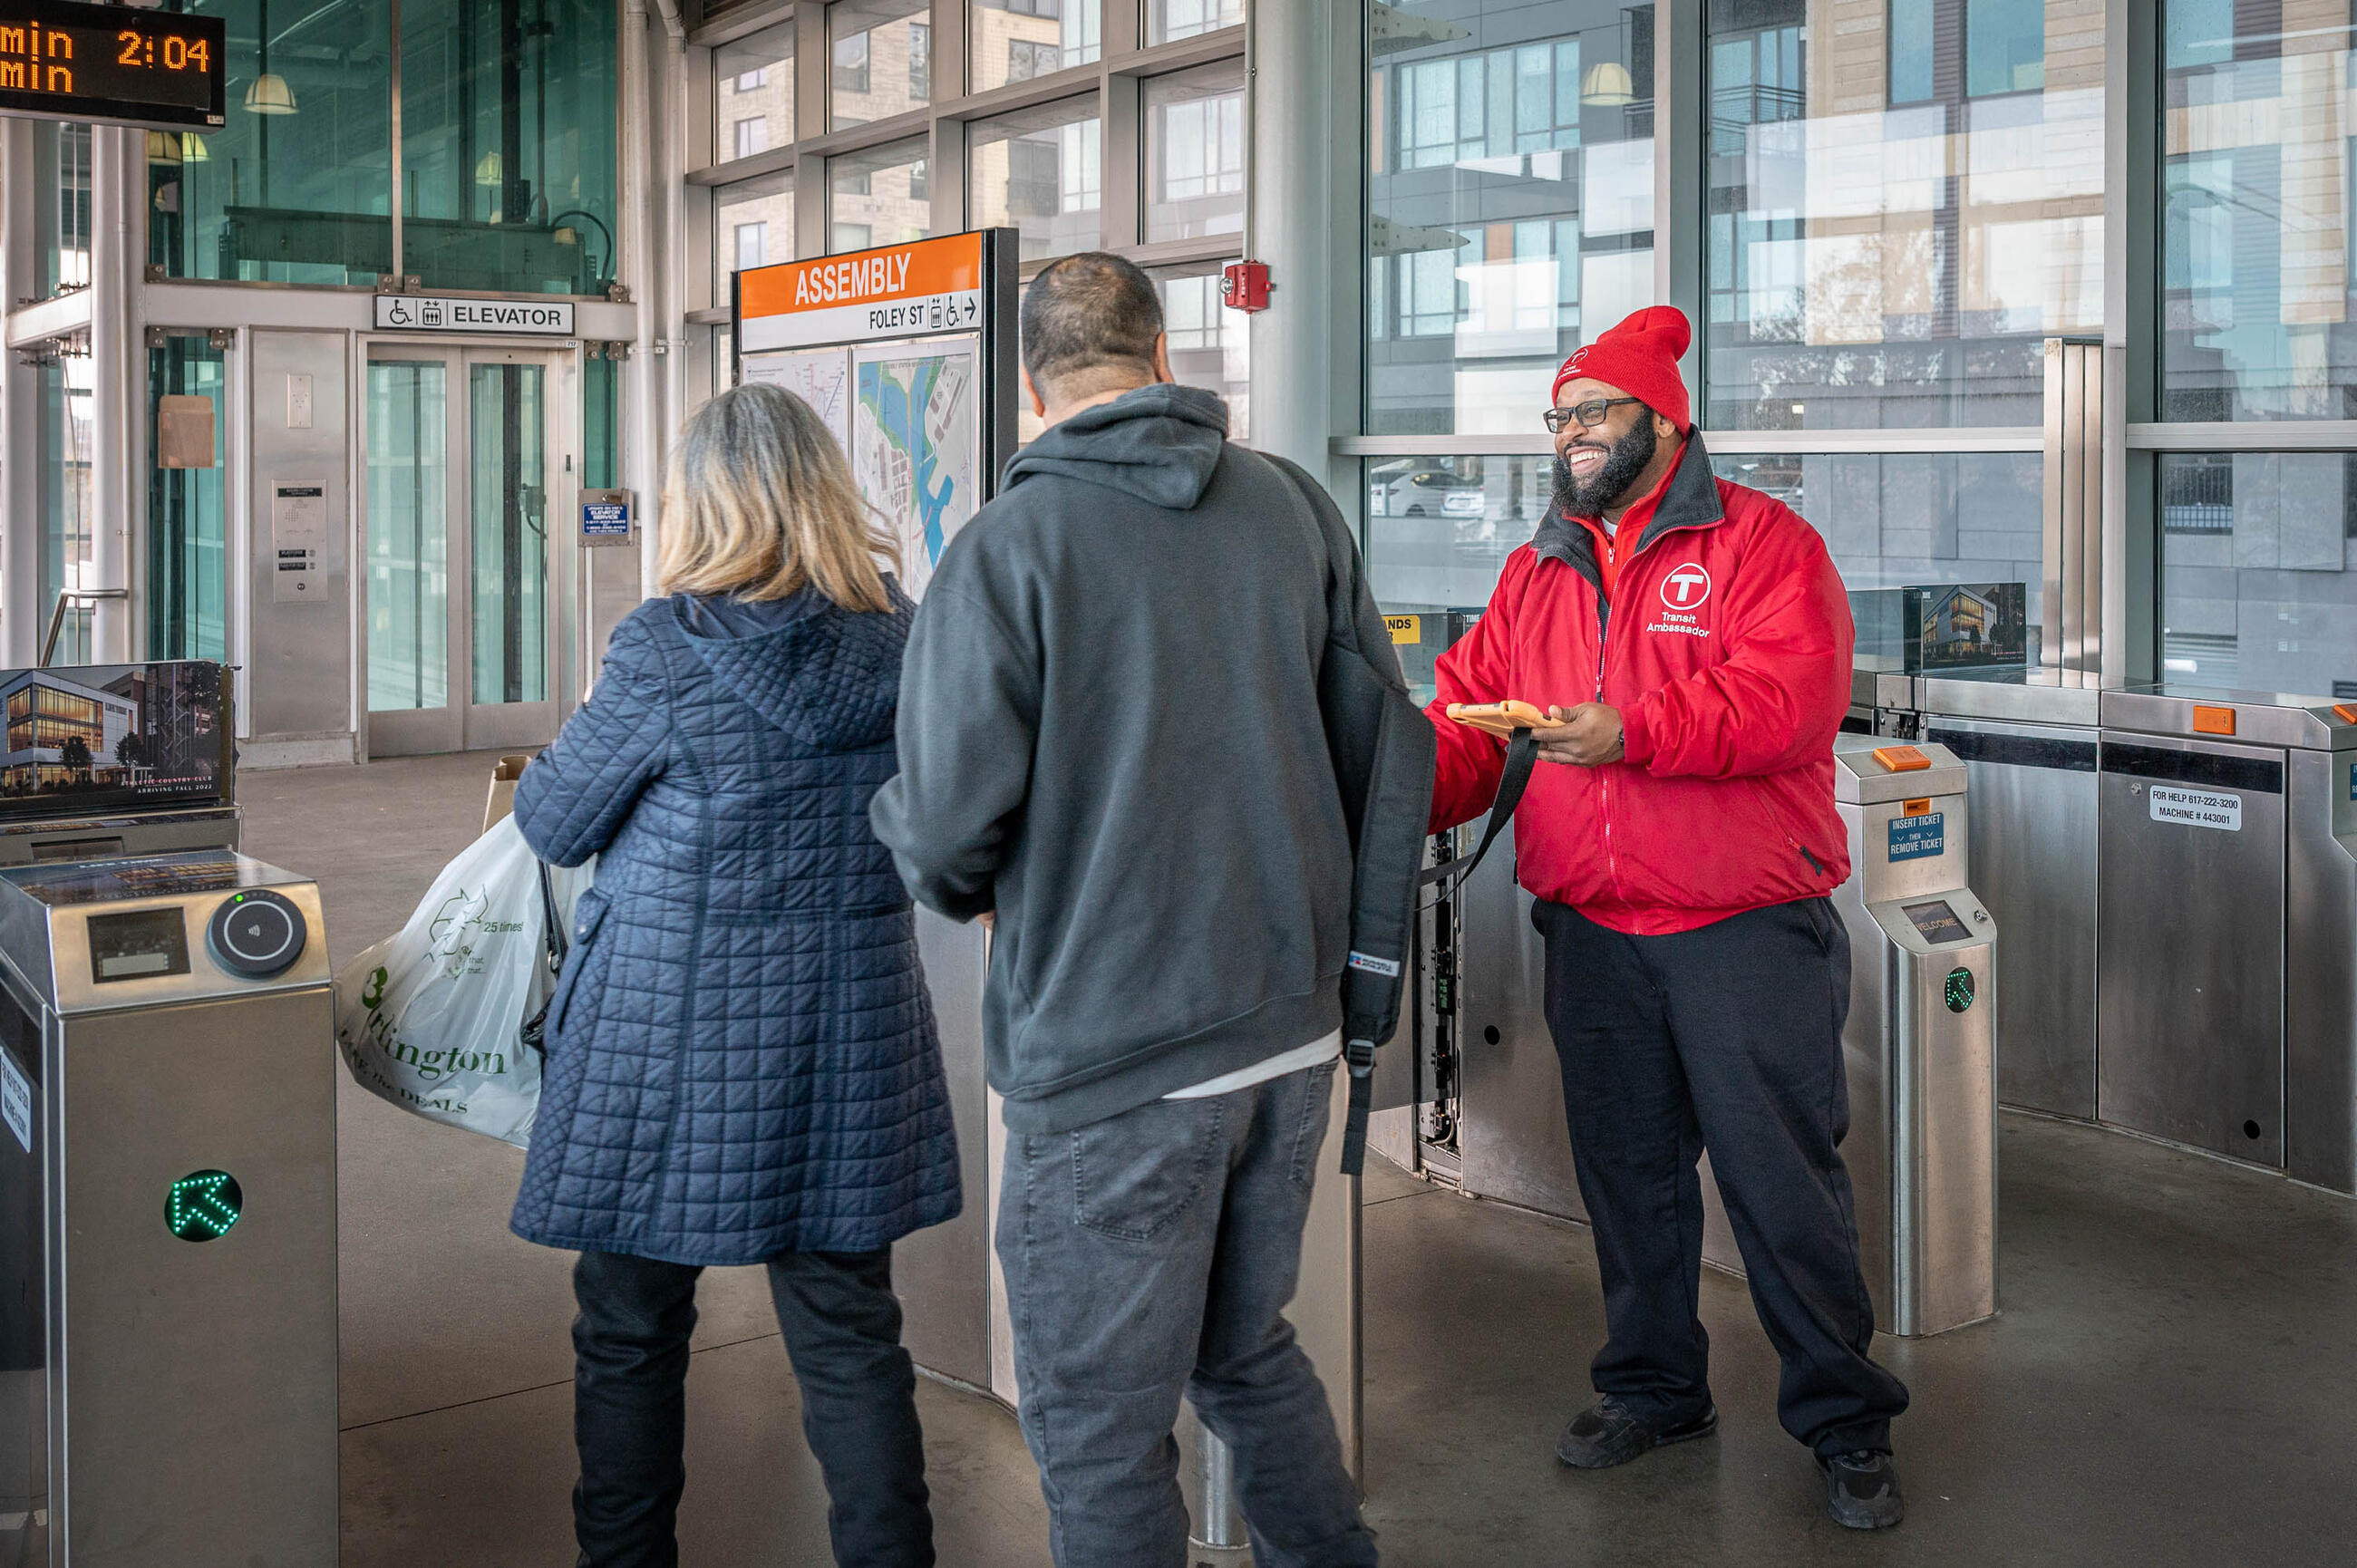 Transit ambassador in red jacket helping a pair of riders at the Assembly fare gate